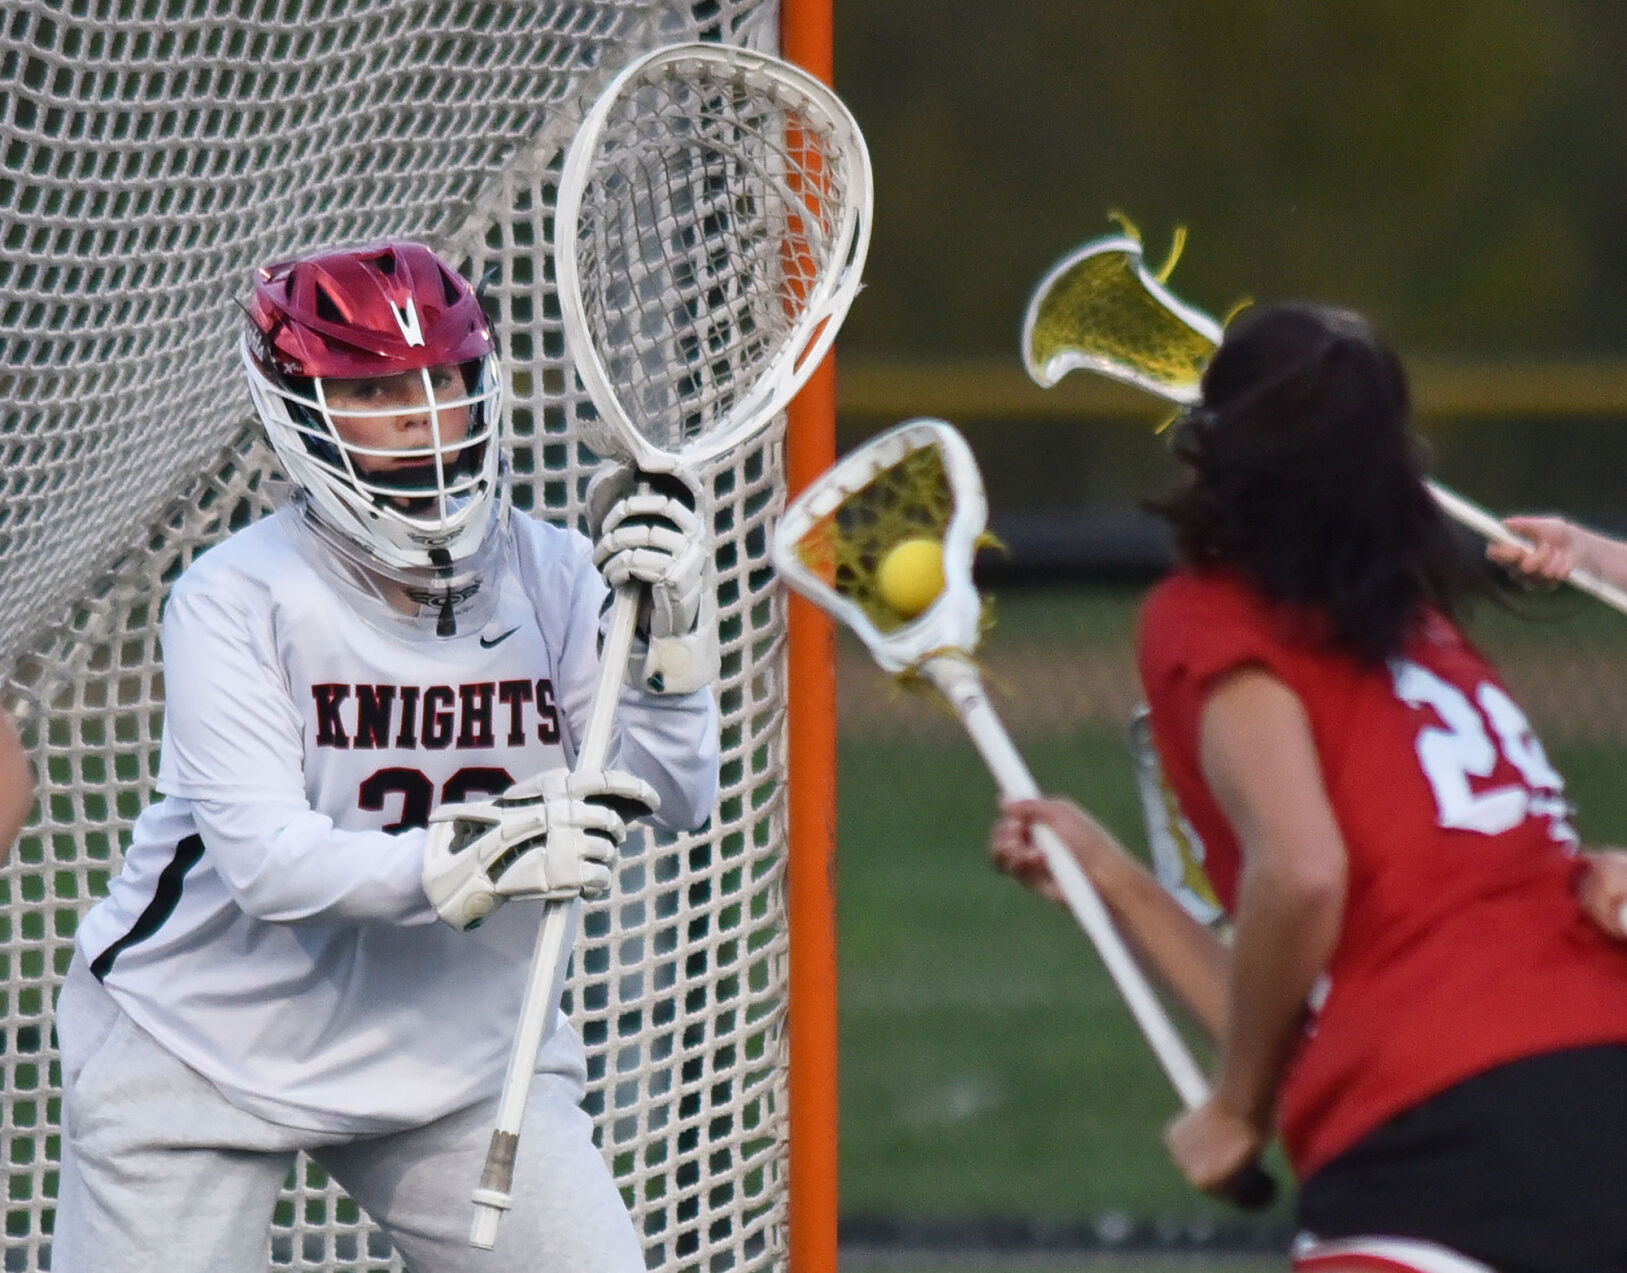 No fear: North Andover’s Melville a cut above rest in goal